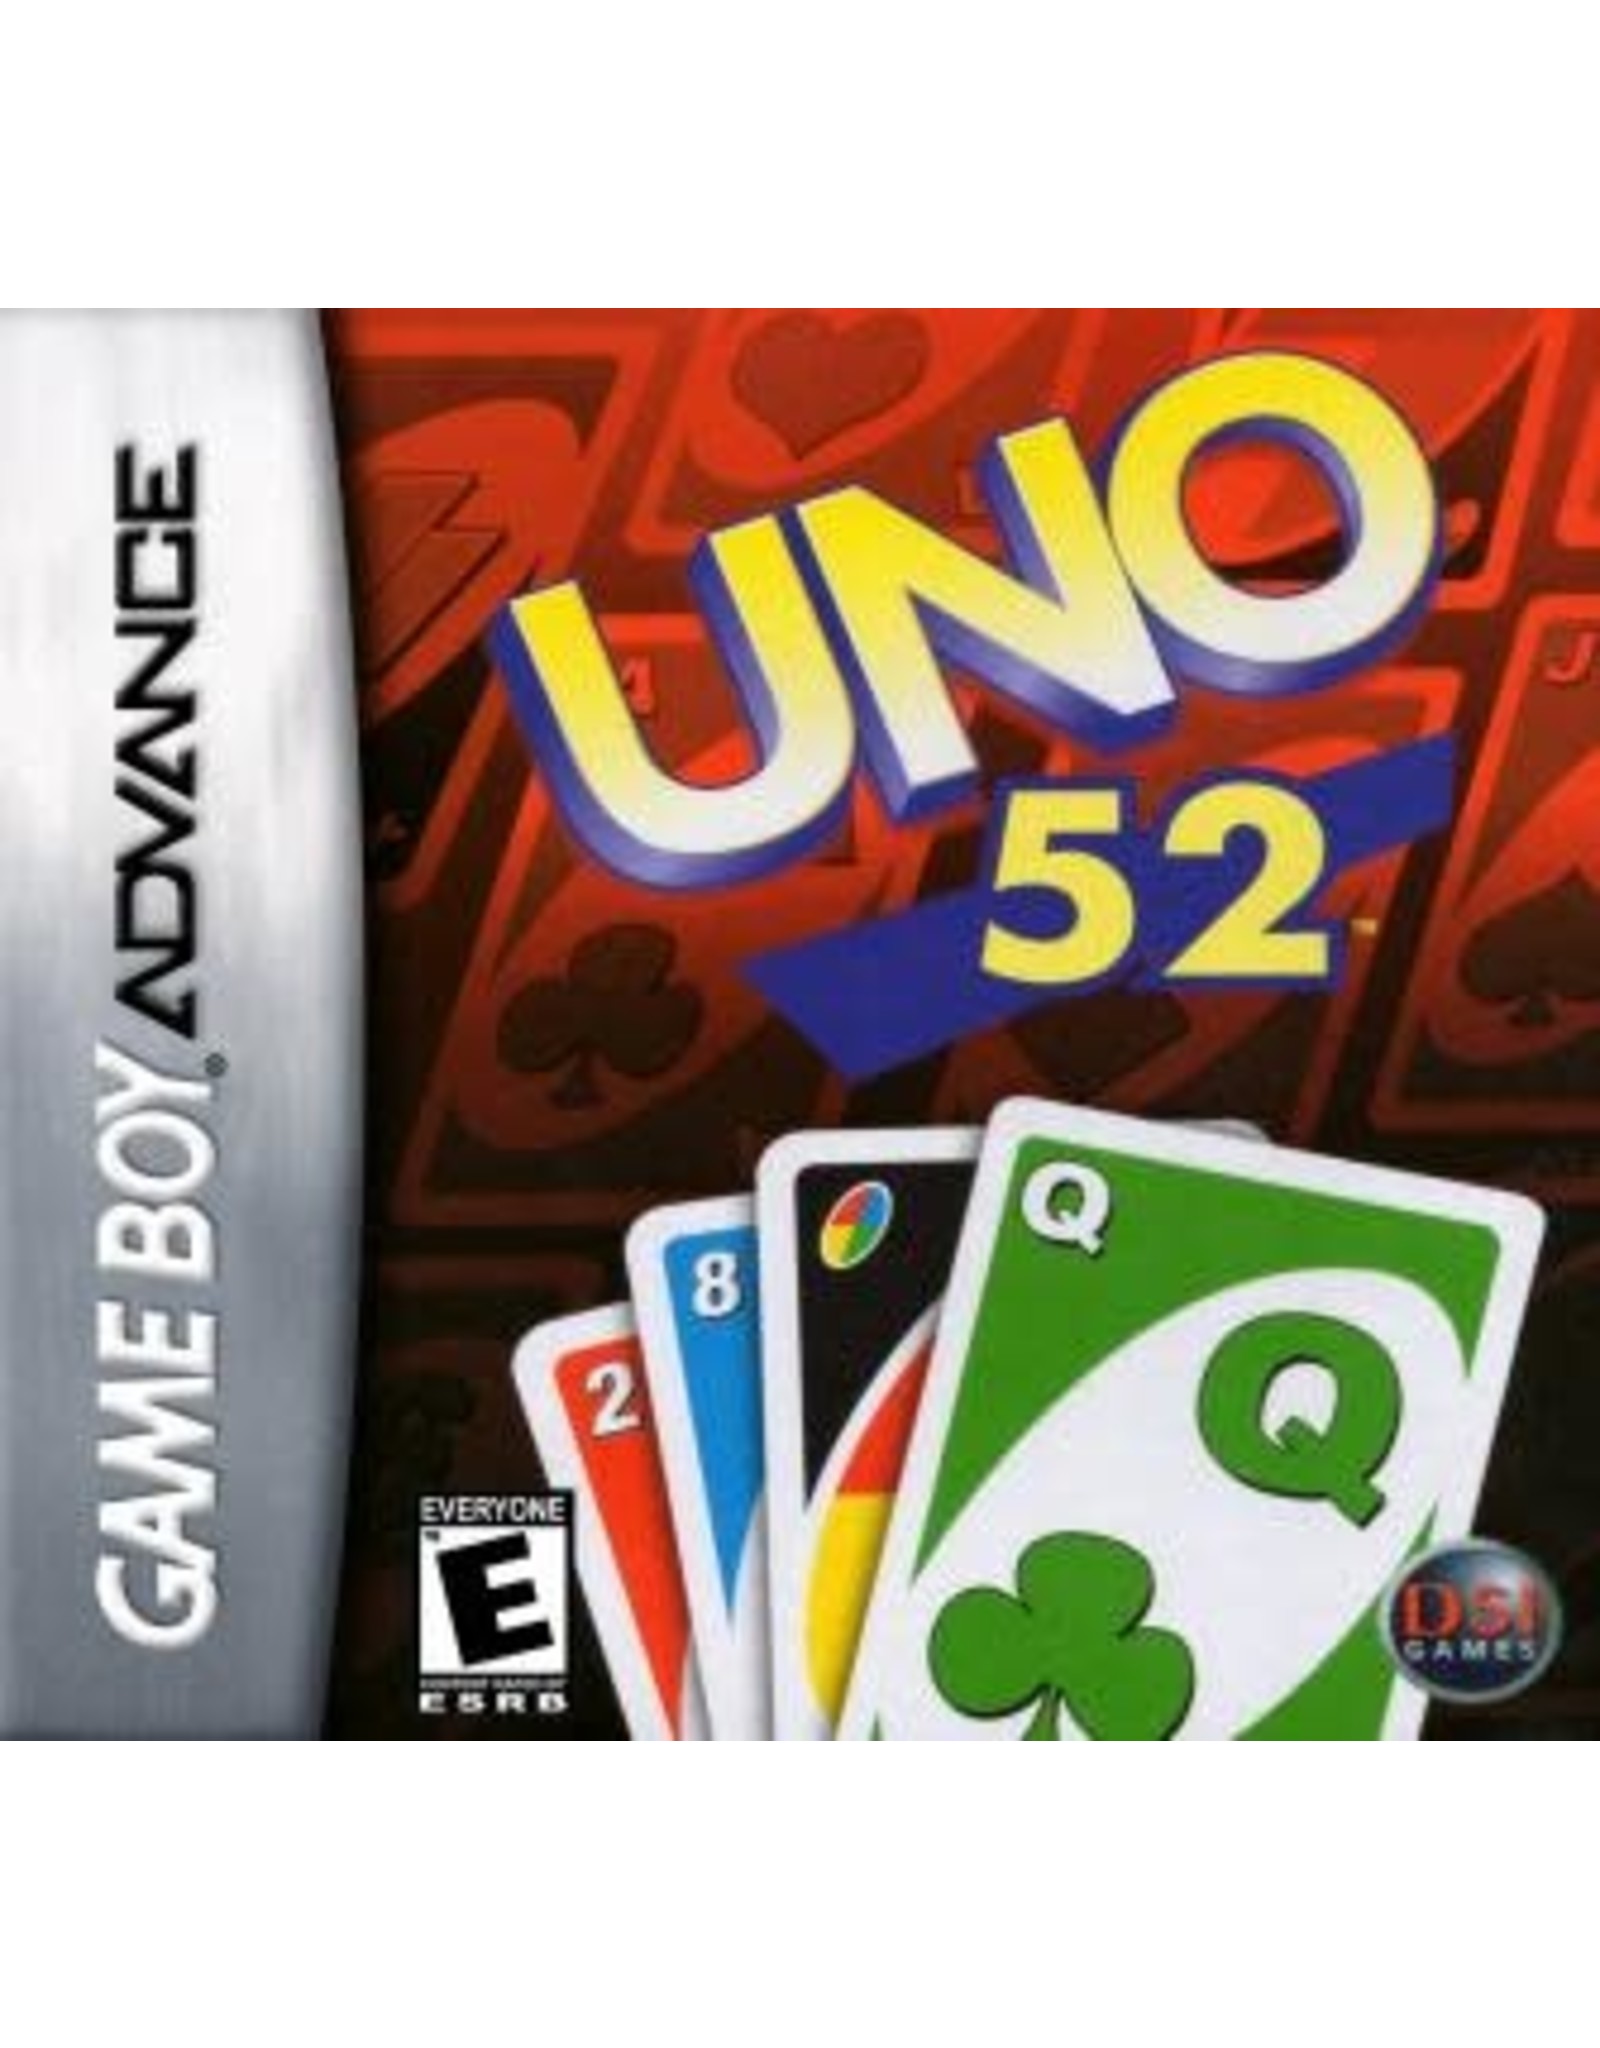 Game Boy Advance Uno 52 (Cart Only)